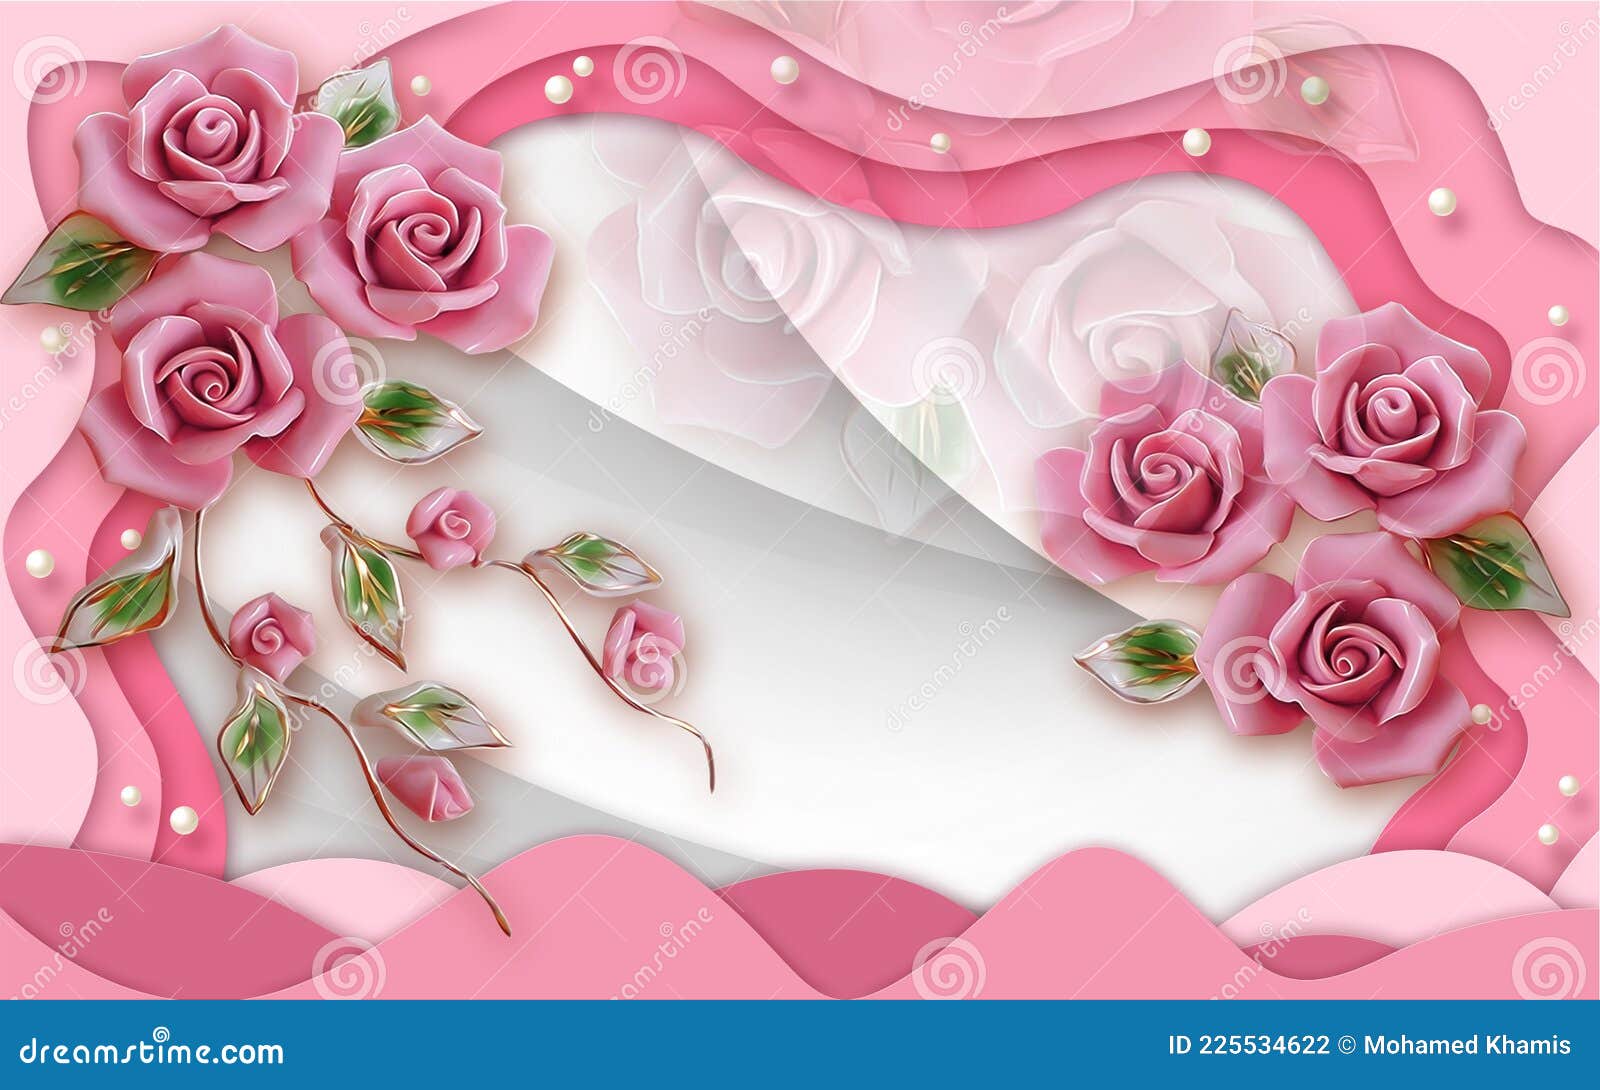 3D HD Roses Wallpapers - Top Free 3D HD Roses Backgrounds - WallpaperAccess